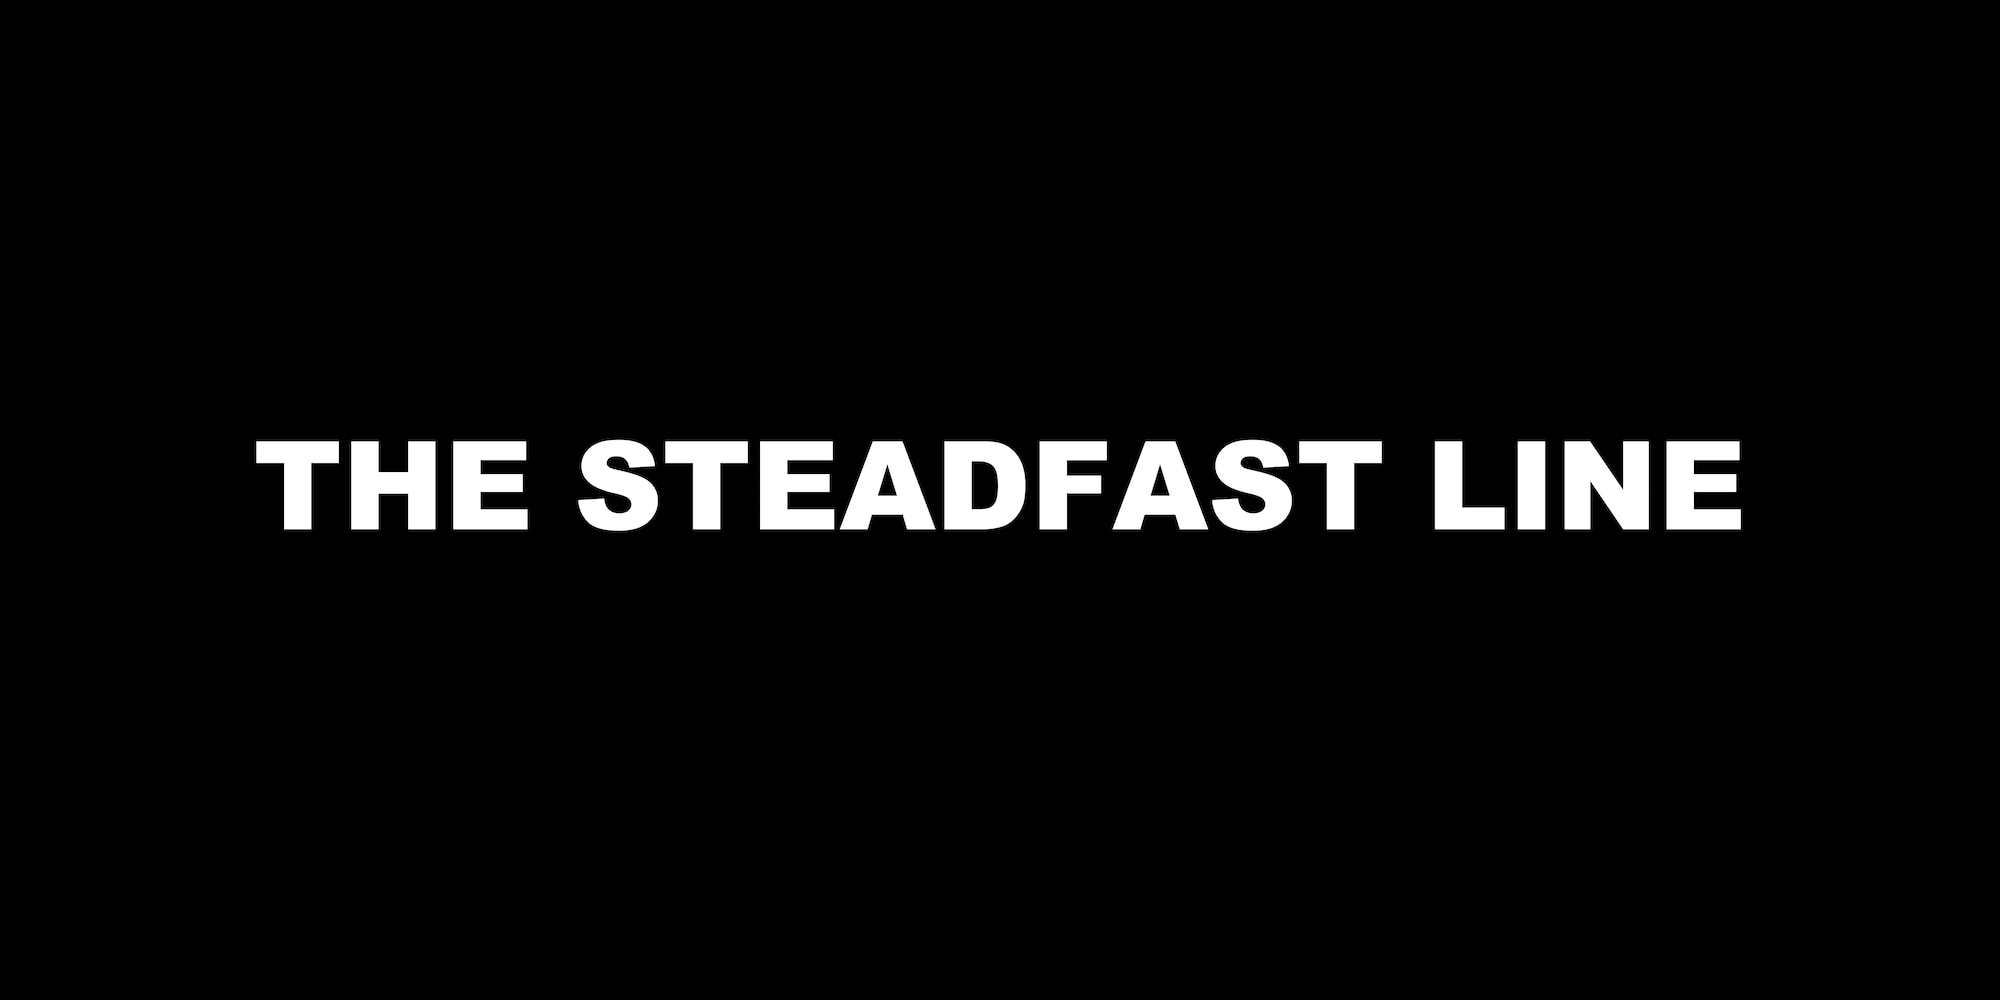 This image depicts the words "The Steadfast Line" over a field of black.